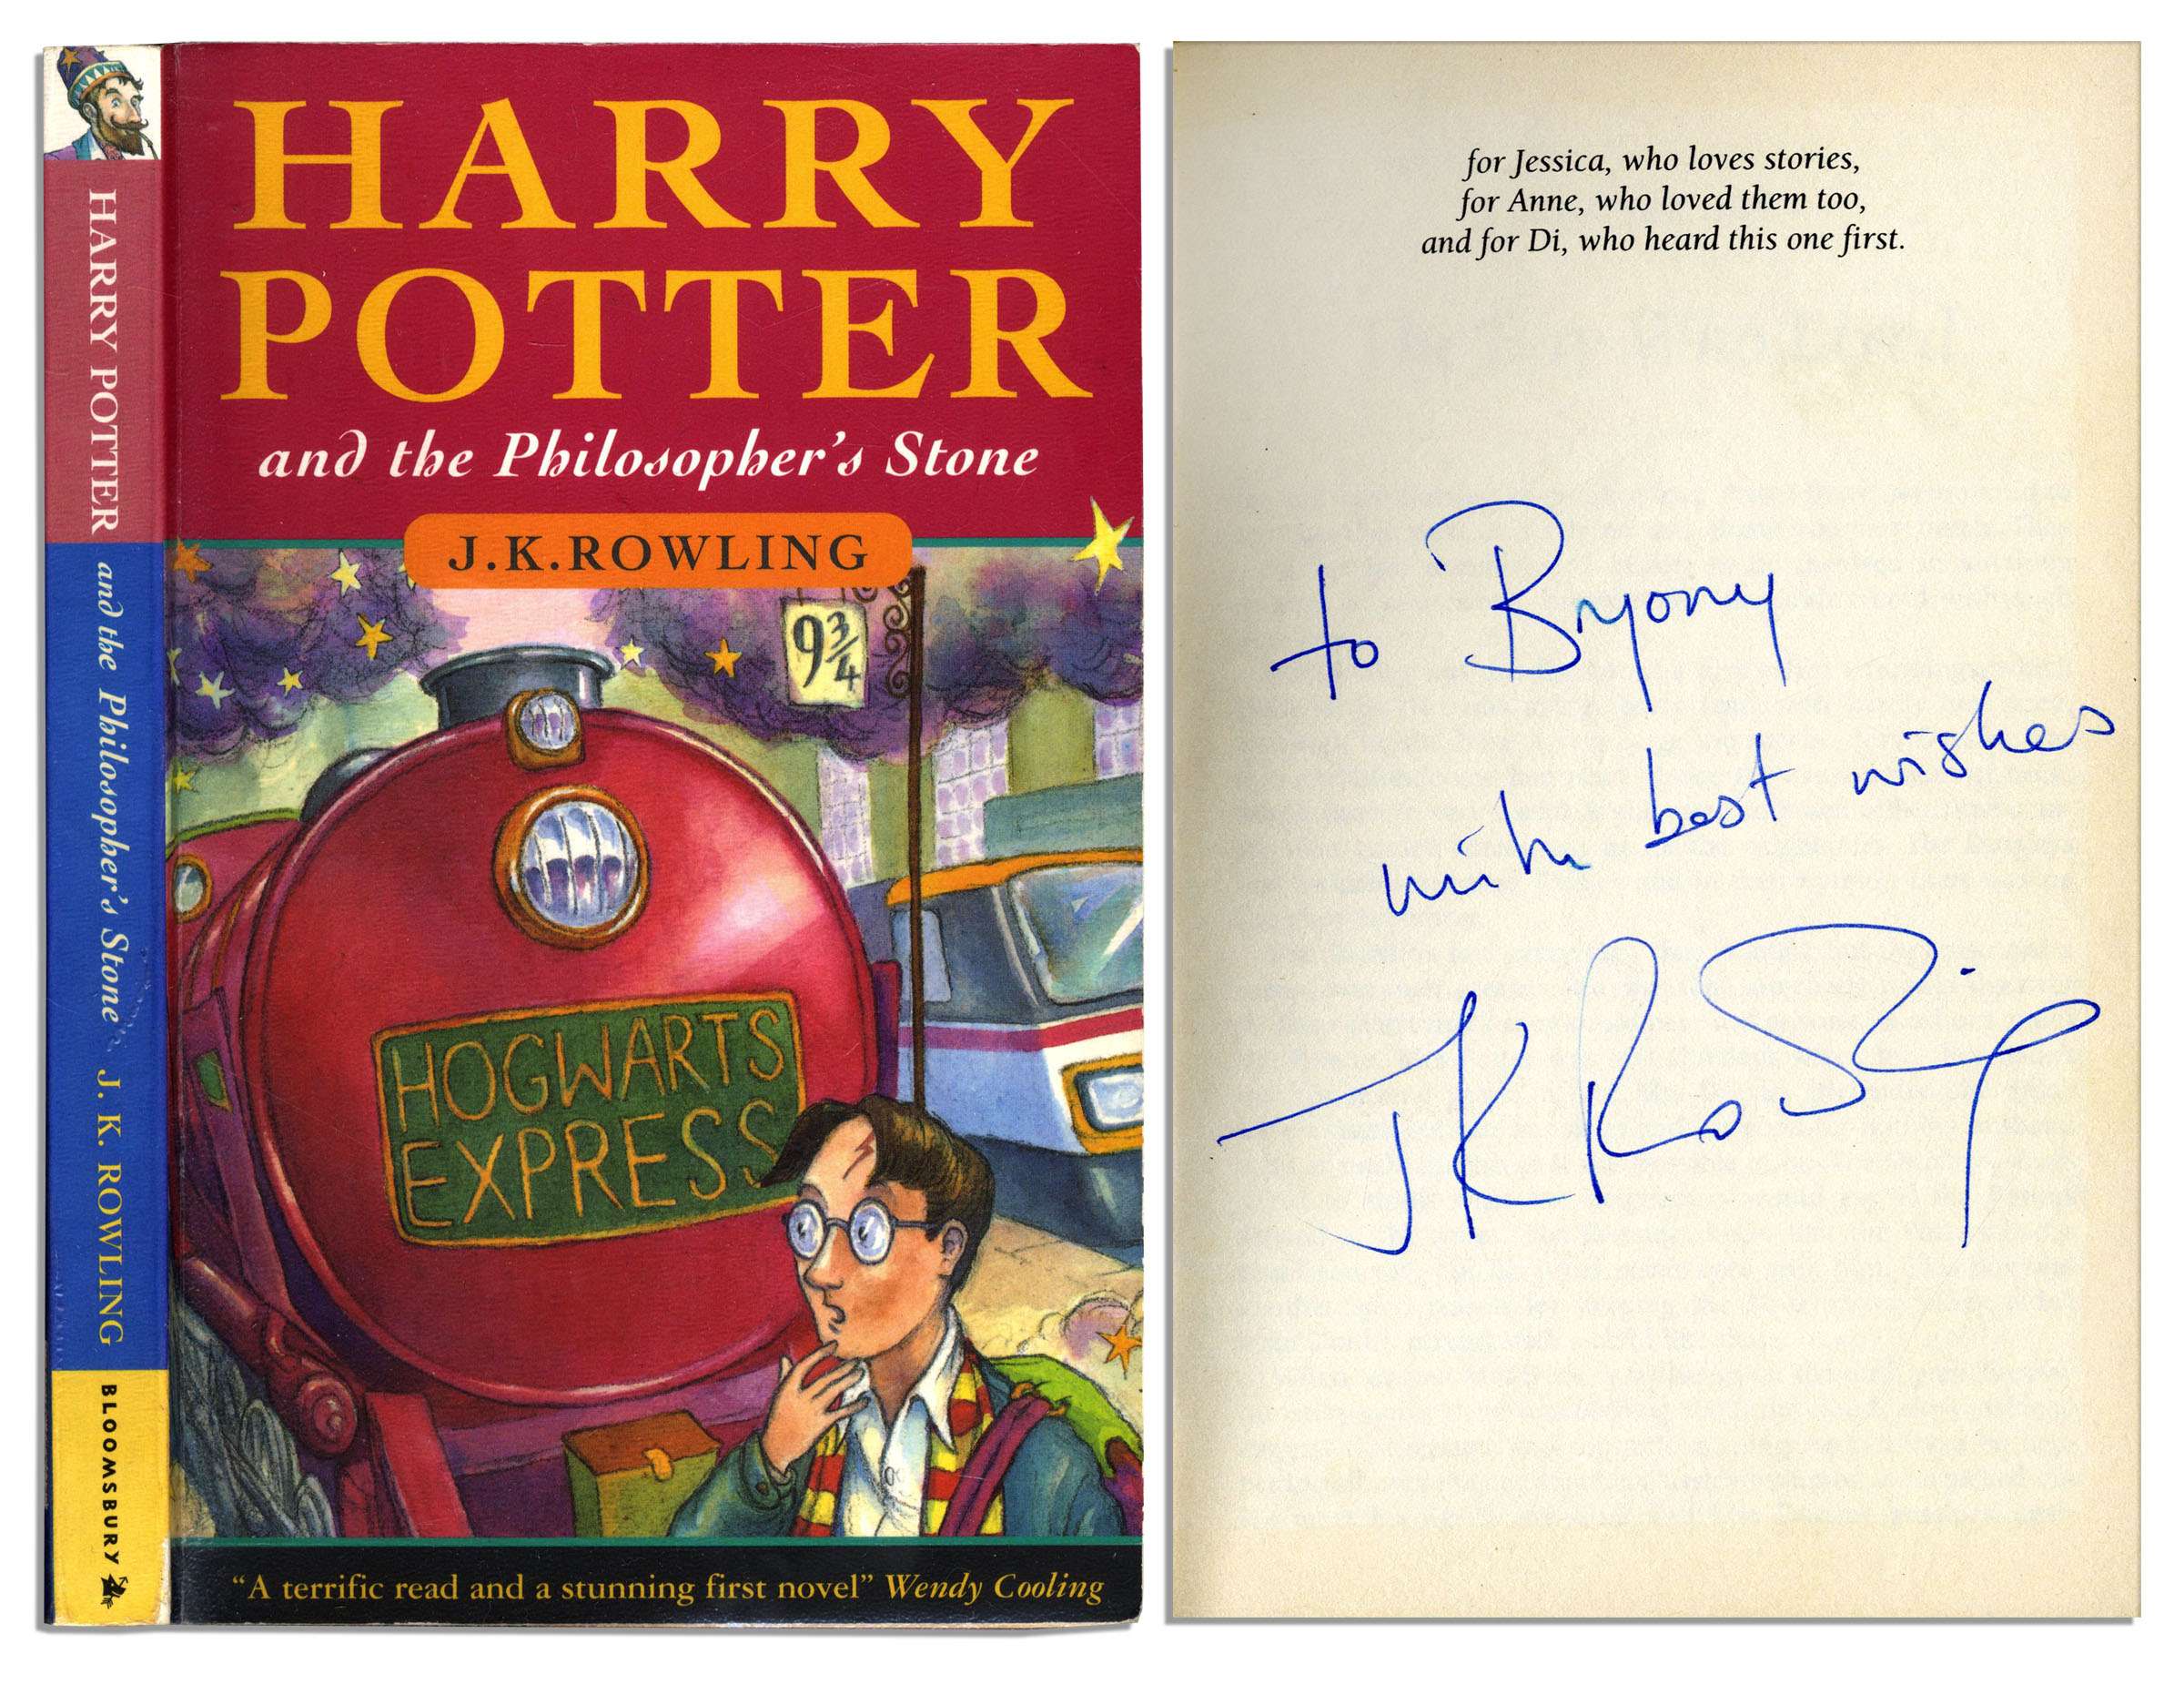 J.K. Rowling 1st Edition Harry Potter Signed Book Sells @ $17000